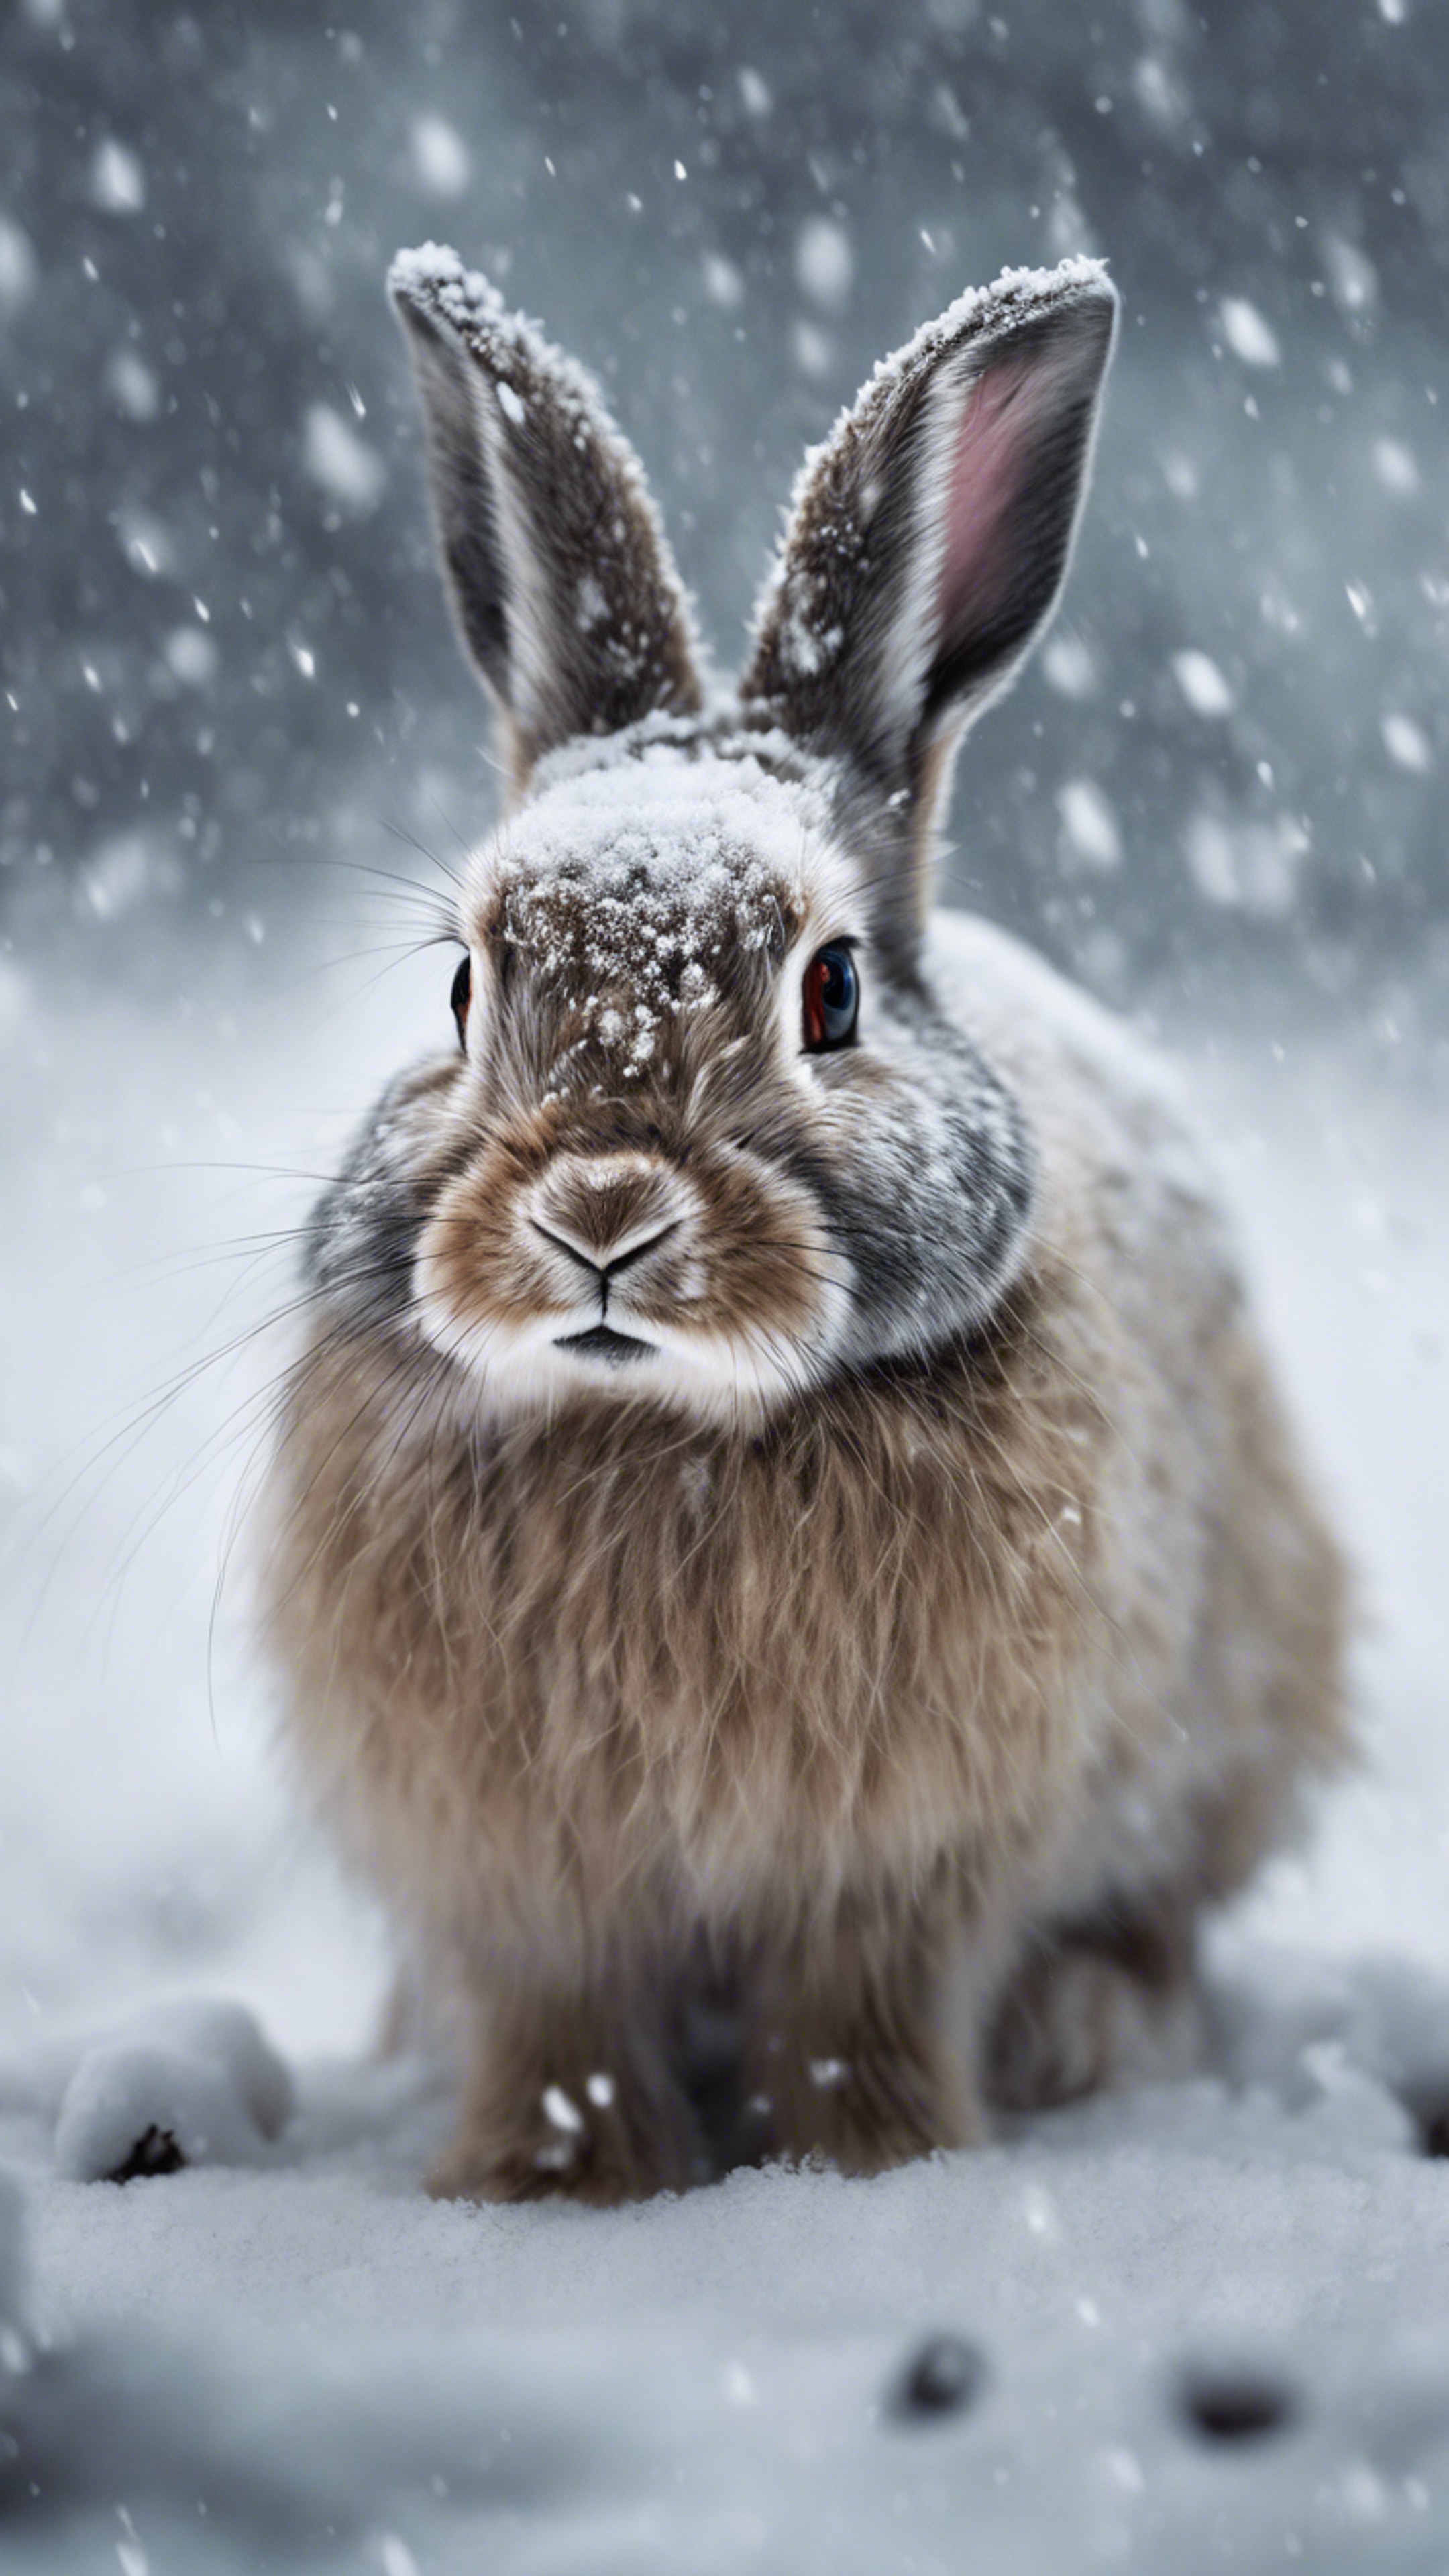 An Arctic rabbit braving a blizzard, its fur blending in with the snow. Hintergrund[f8597e39ec4d4470ac43]